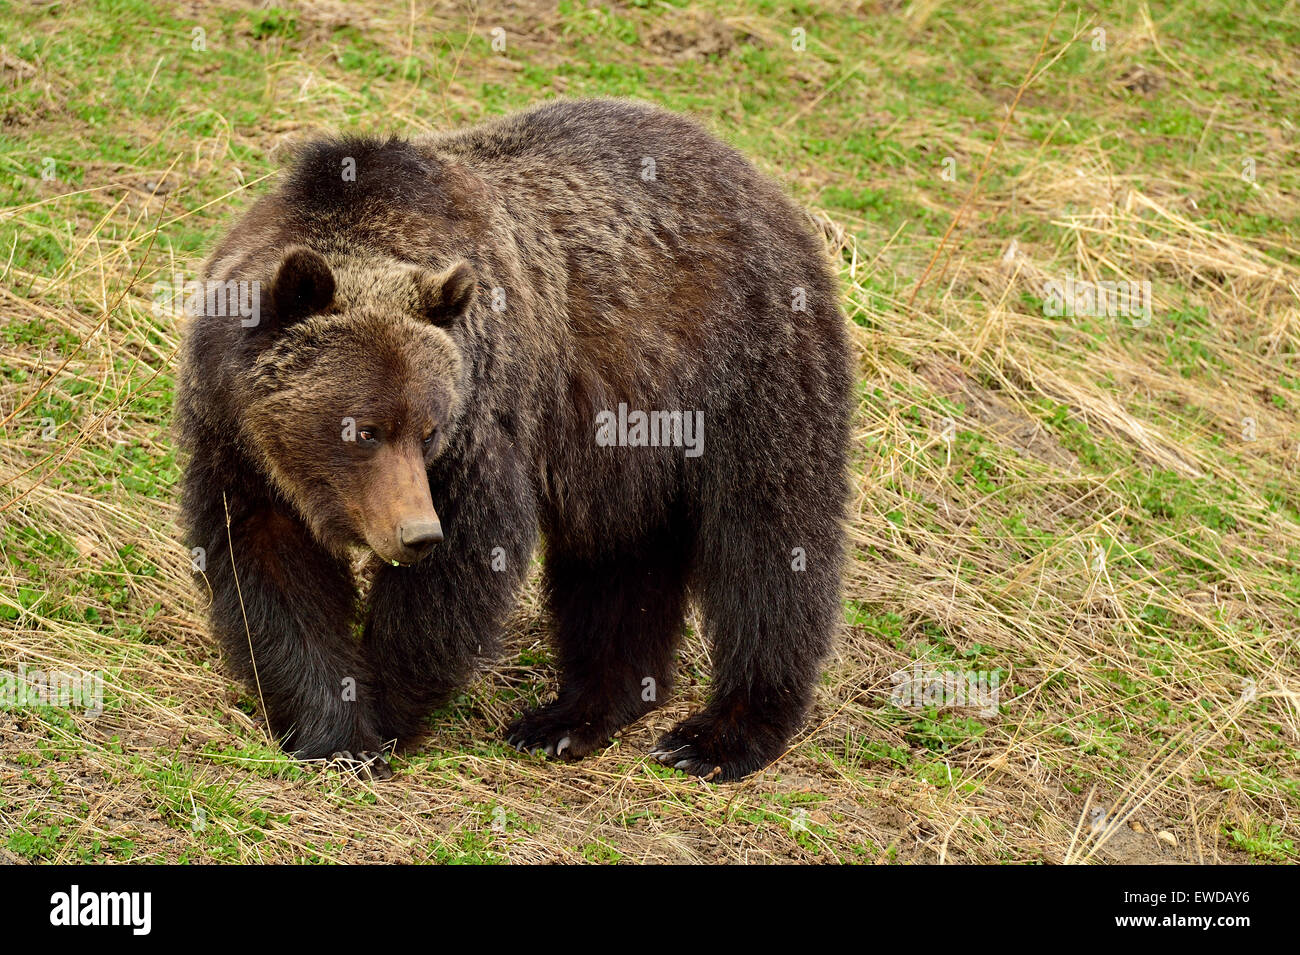 An image of an adult grizzly bear,  Ursus arctos,foraging for some fresh green clover Stock Photo